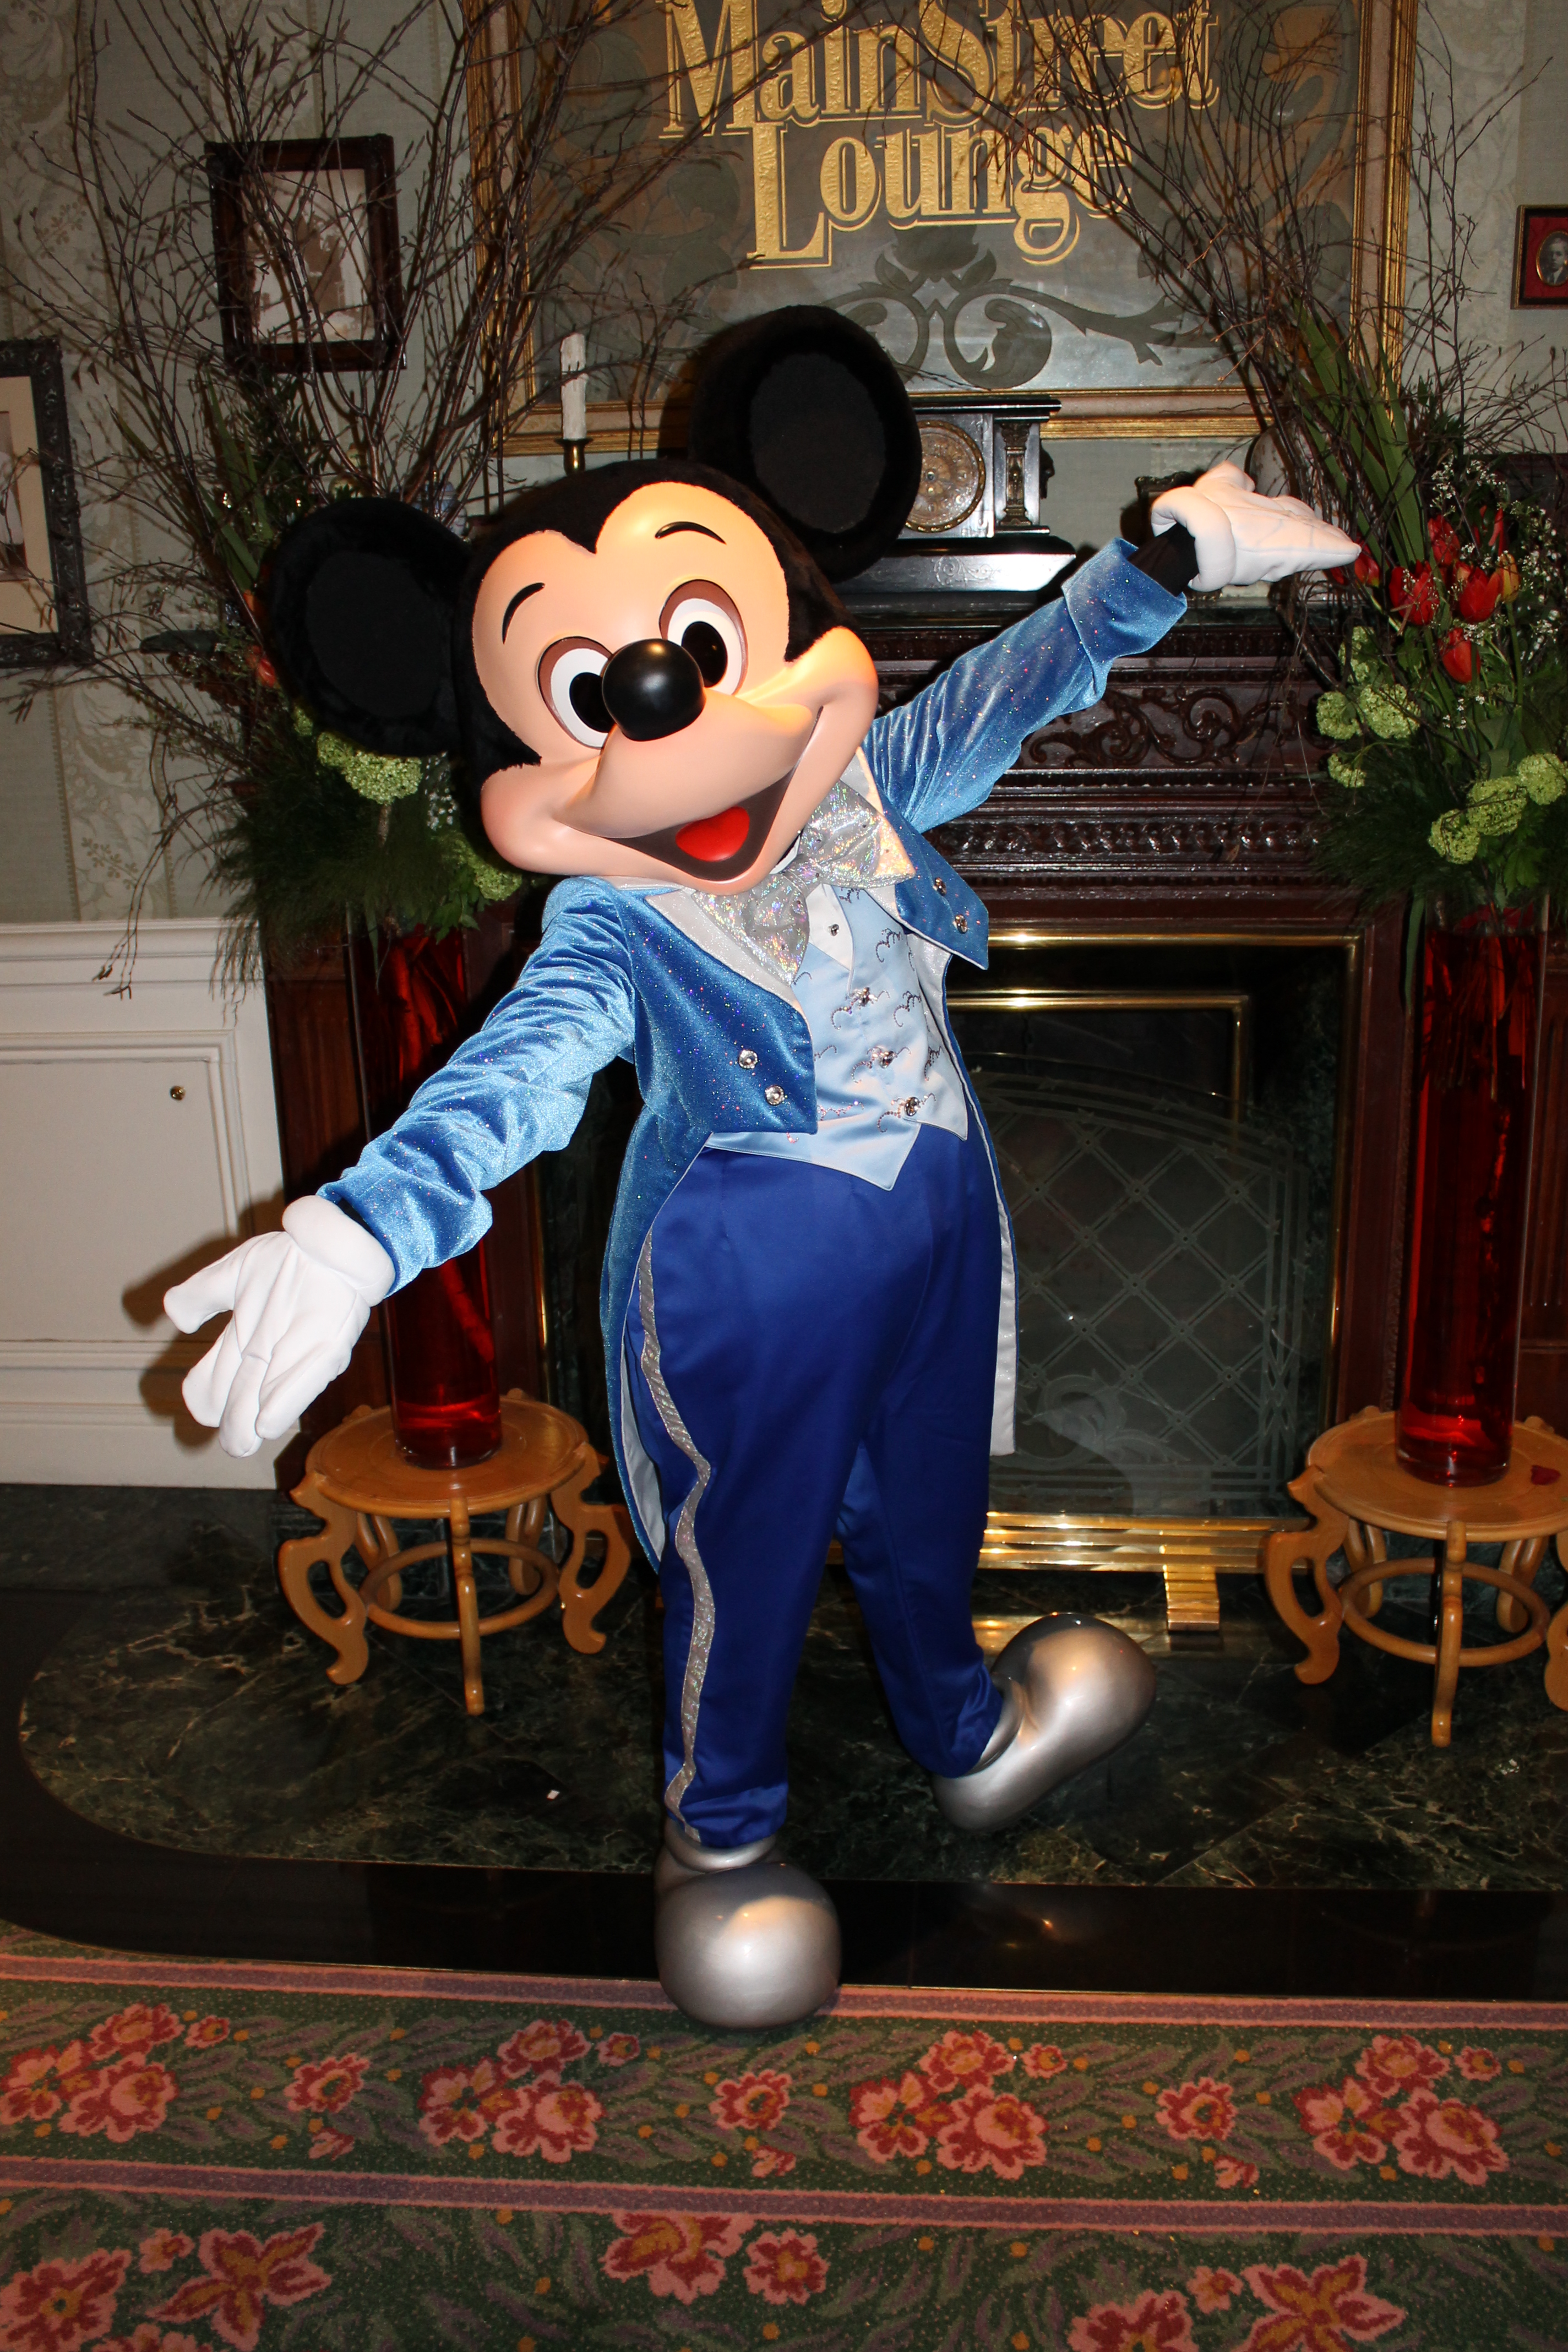 Mickey wearing a special outfit at the Disneyland Hotel during Valentine's Day 2013. Mickey used to wear this outfit during the Candleabration Show which ran from 2007 until 2009.